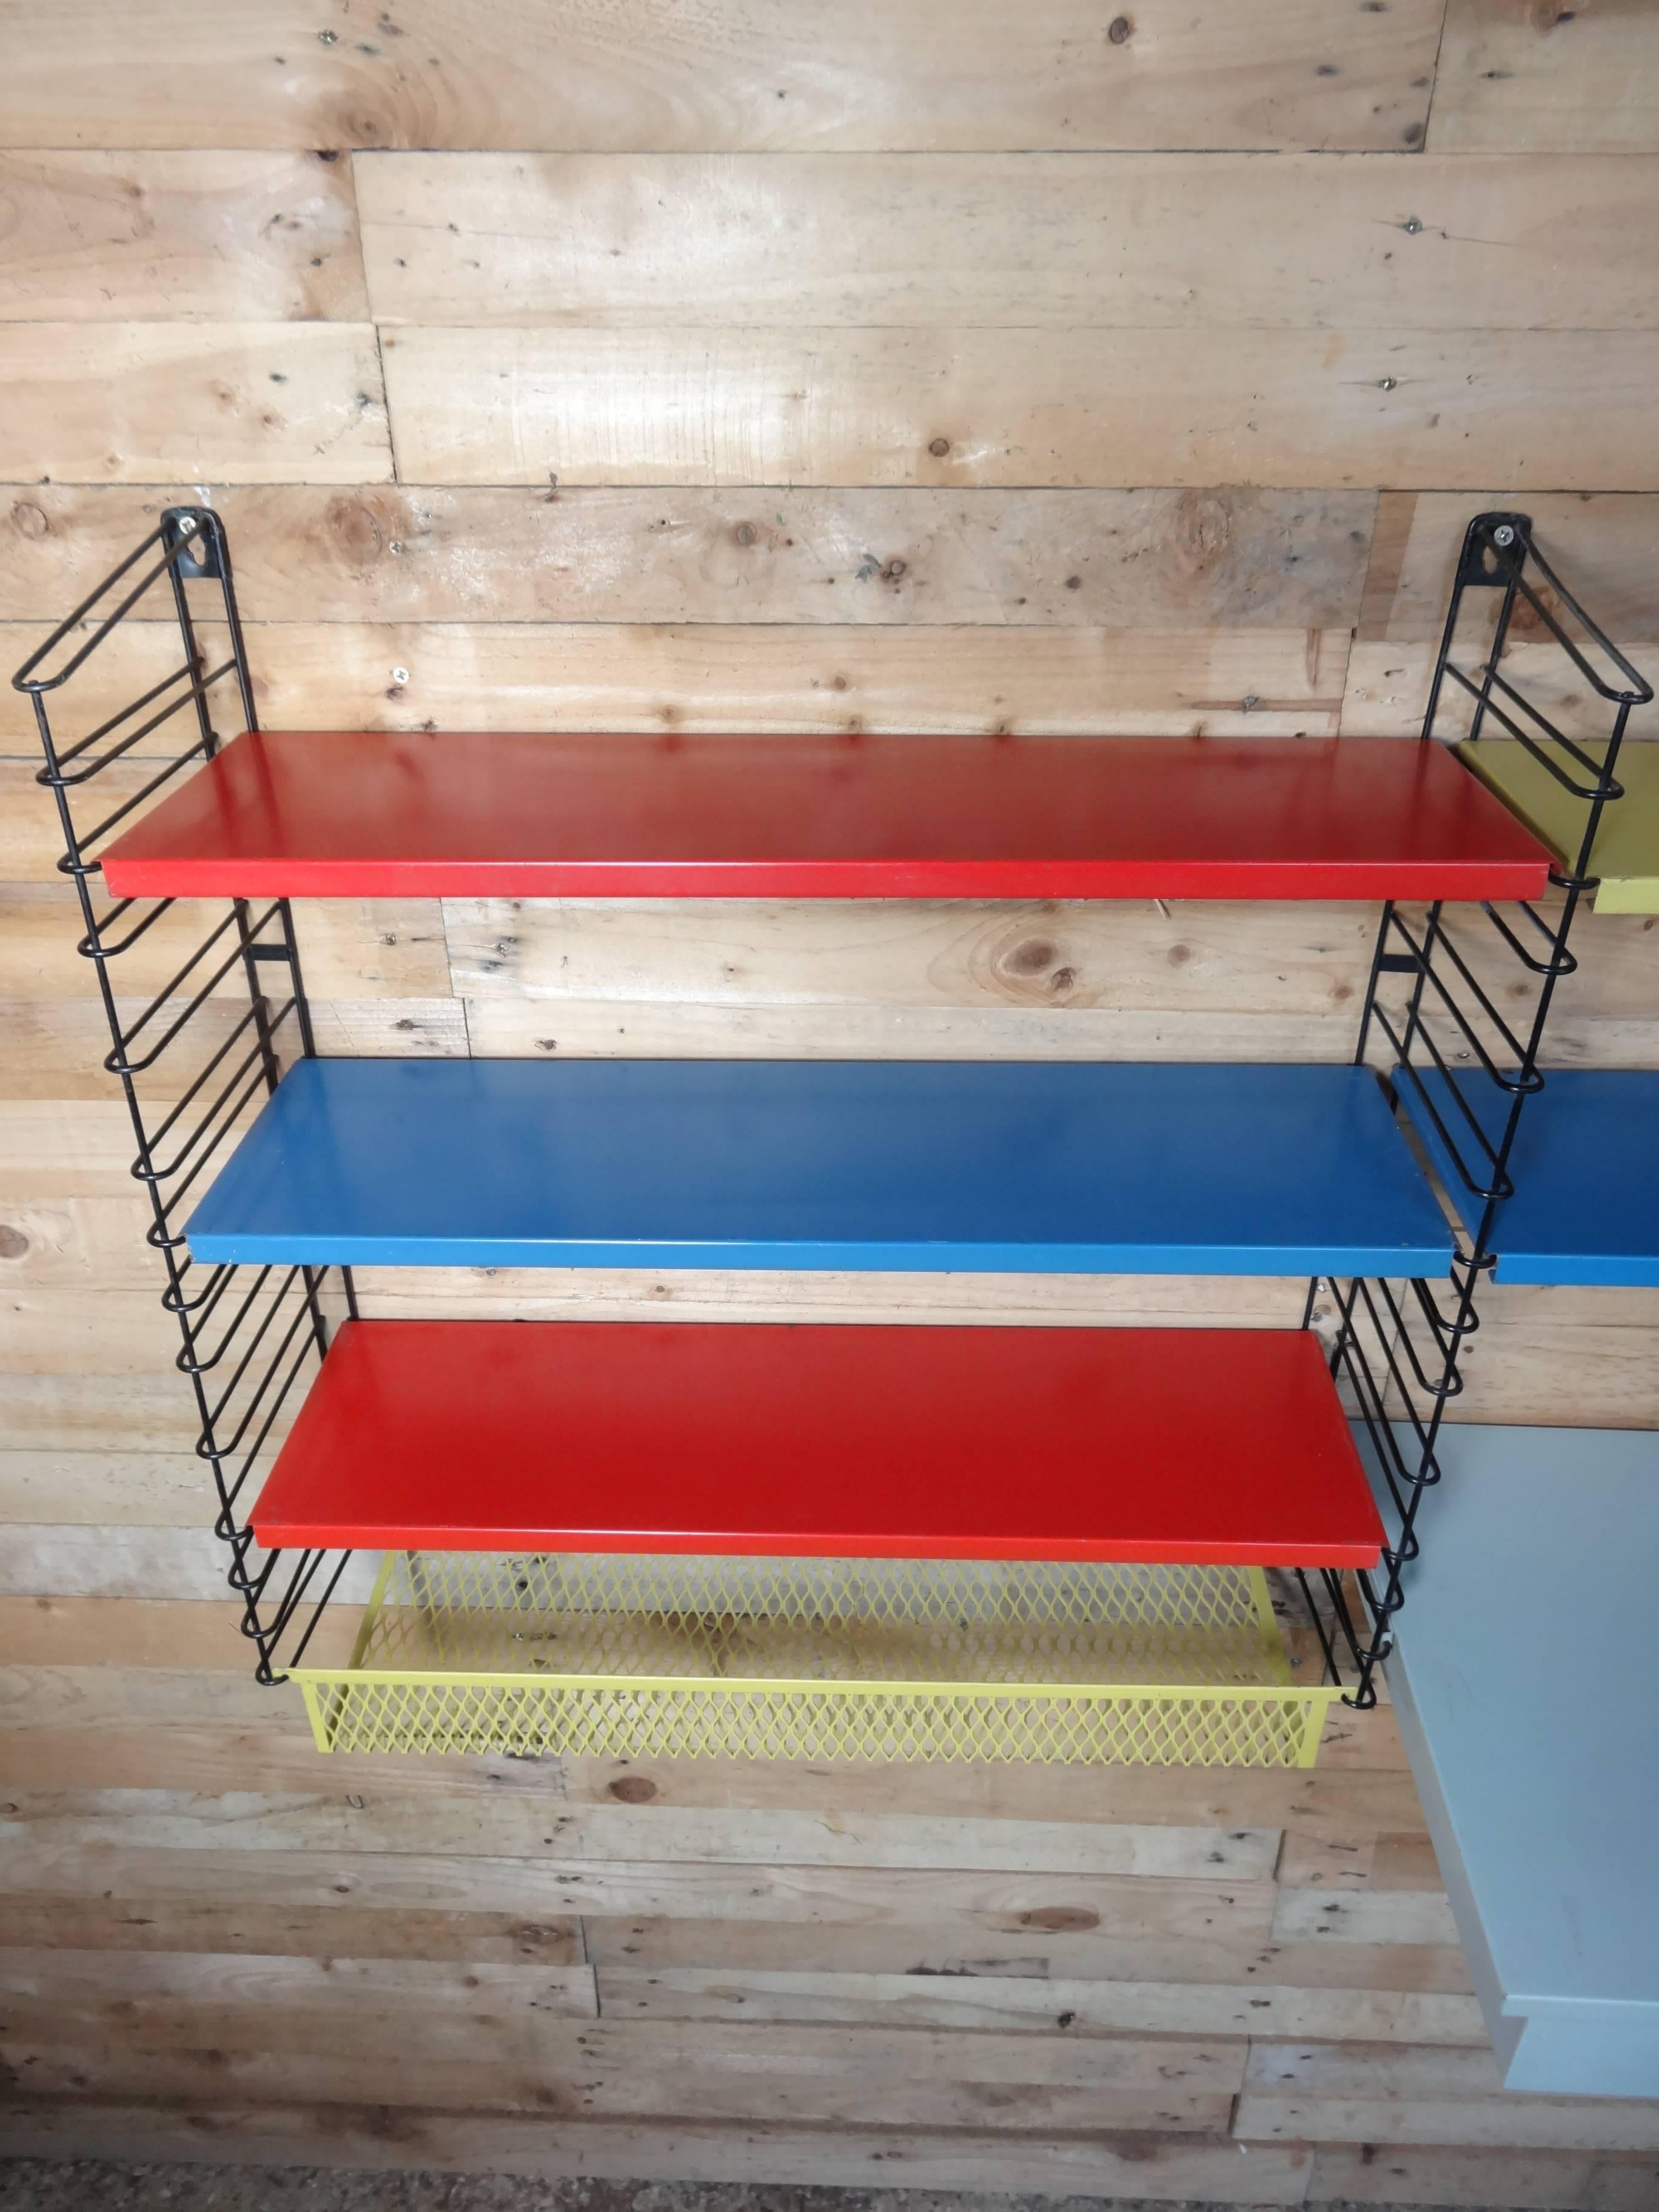 60 retro stunning coloured large metal tomado rack, it has a desk, light and yellow magazine shelf!

This outstanding shelving has typical Tomado design, it comes with five shelves and a sought after desk, original light (impossible to get!) and a